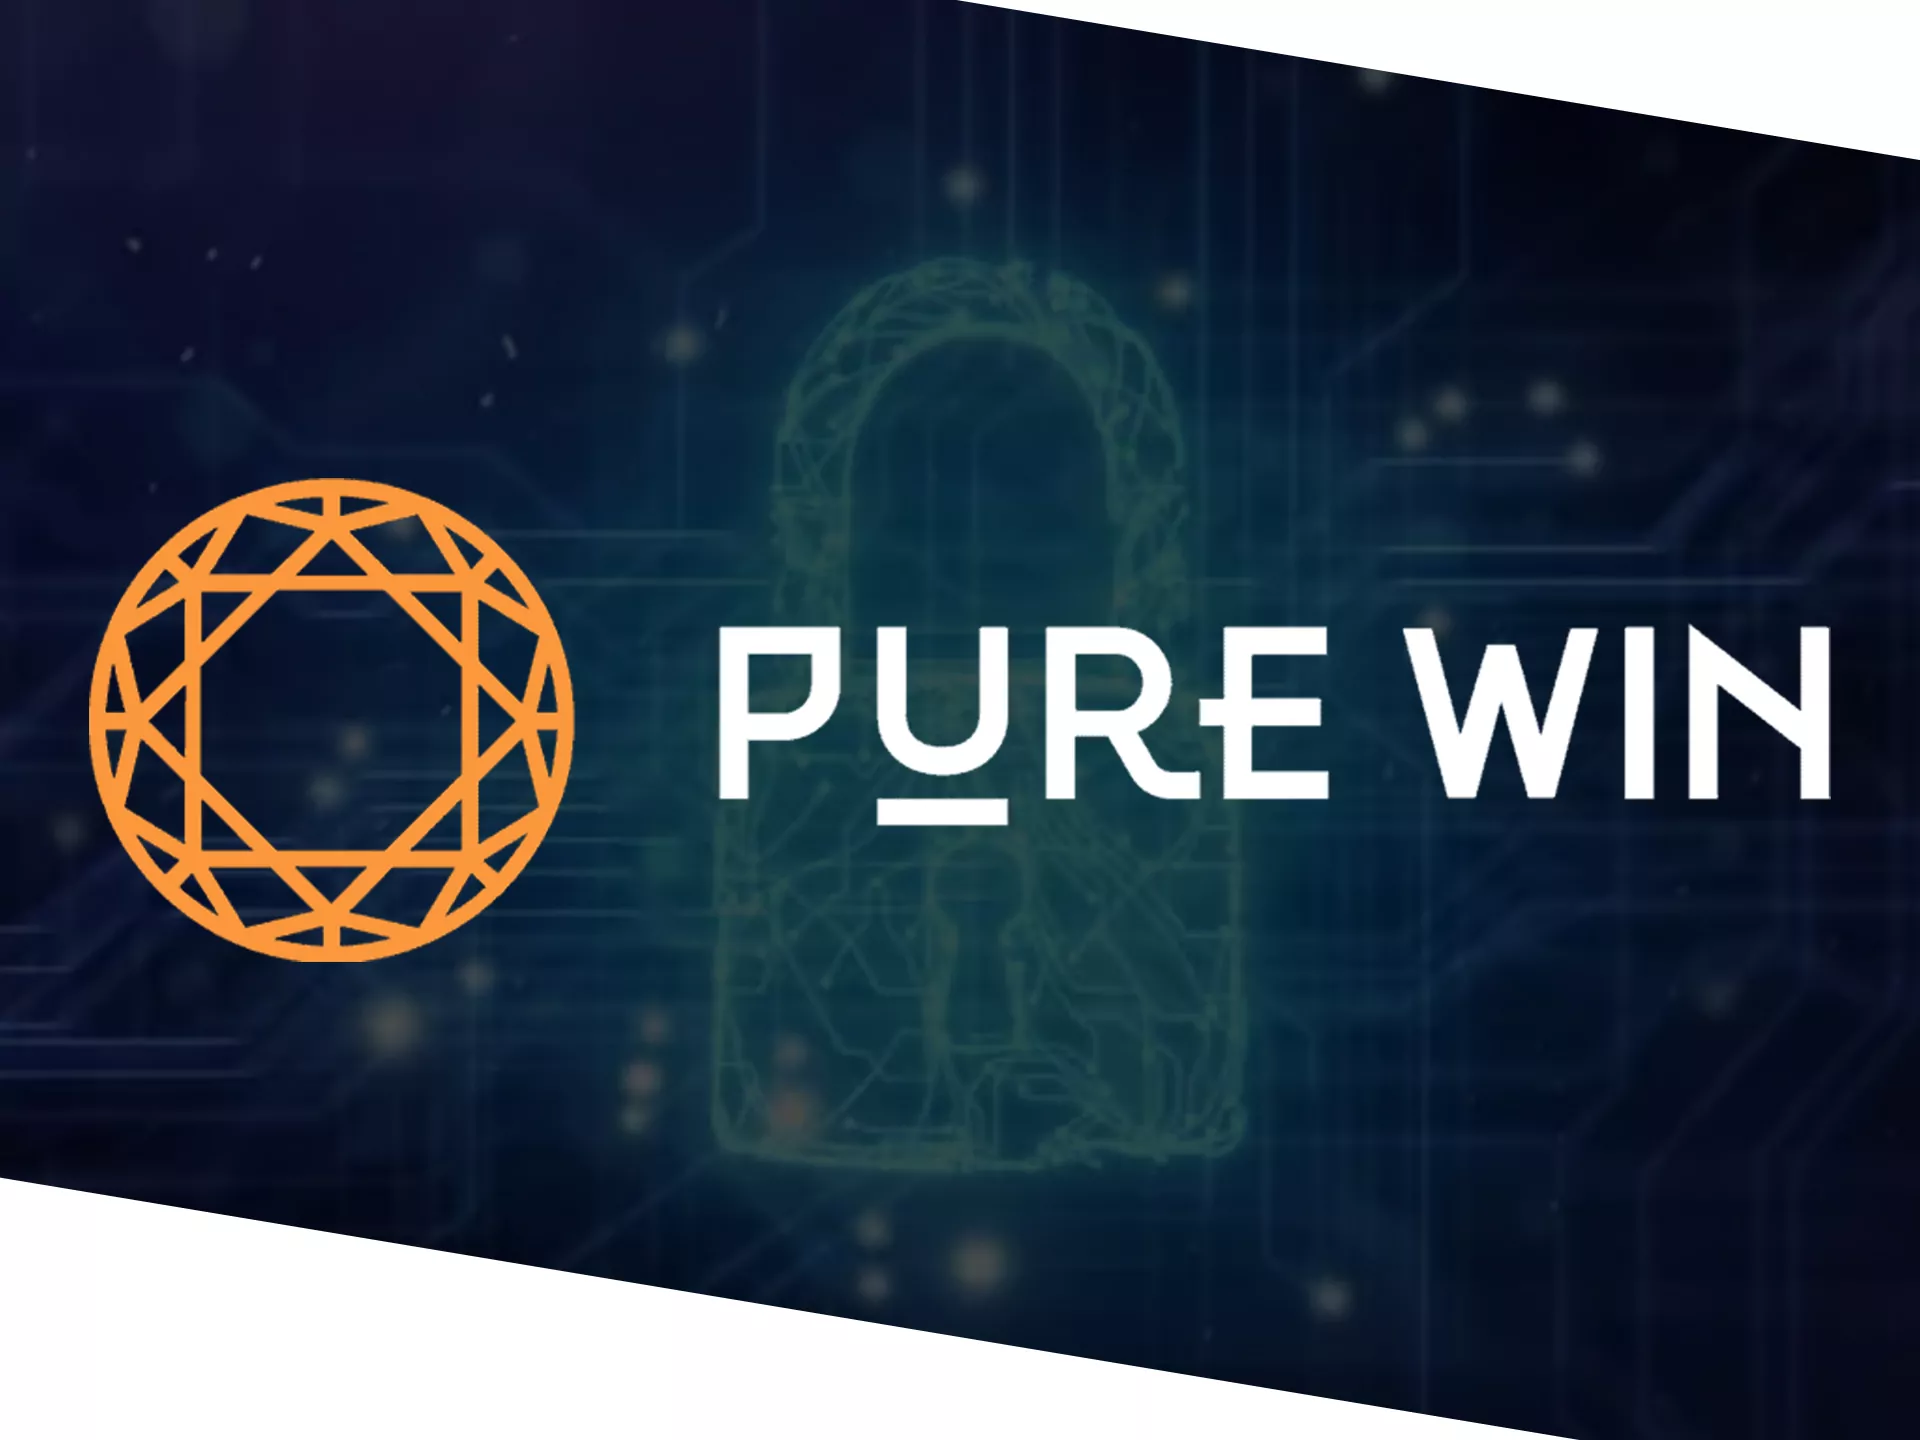 Pure Win app has high level of securing information.